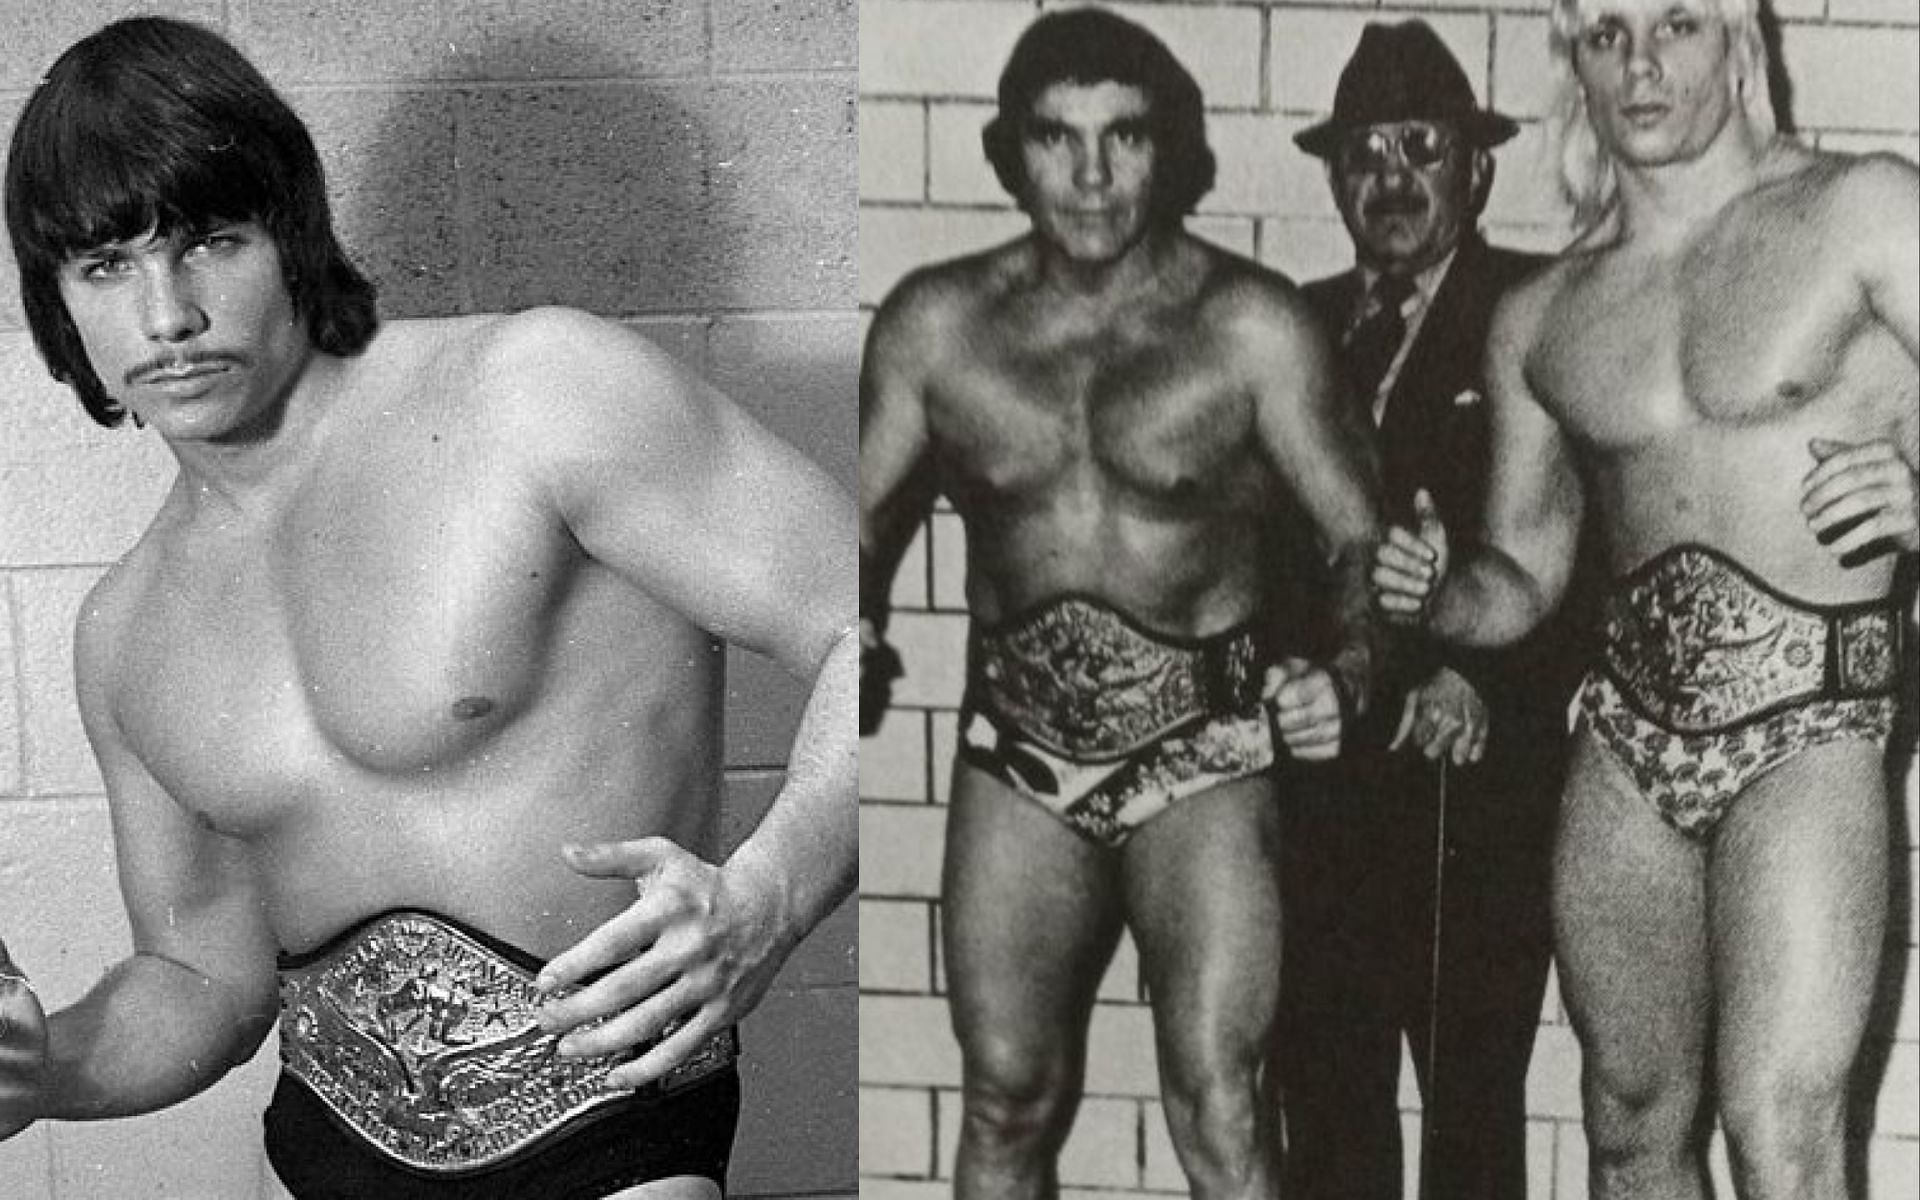 Lanny with his father Angelo Poffo.